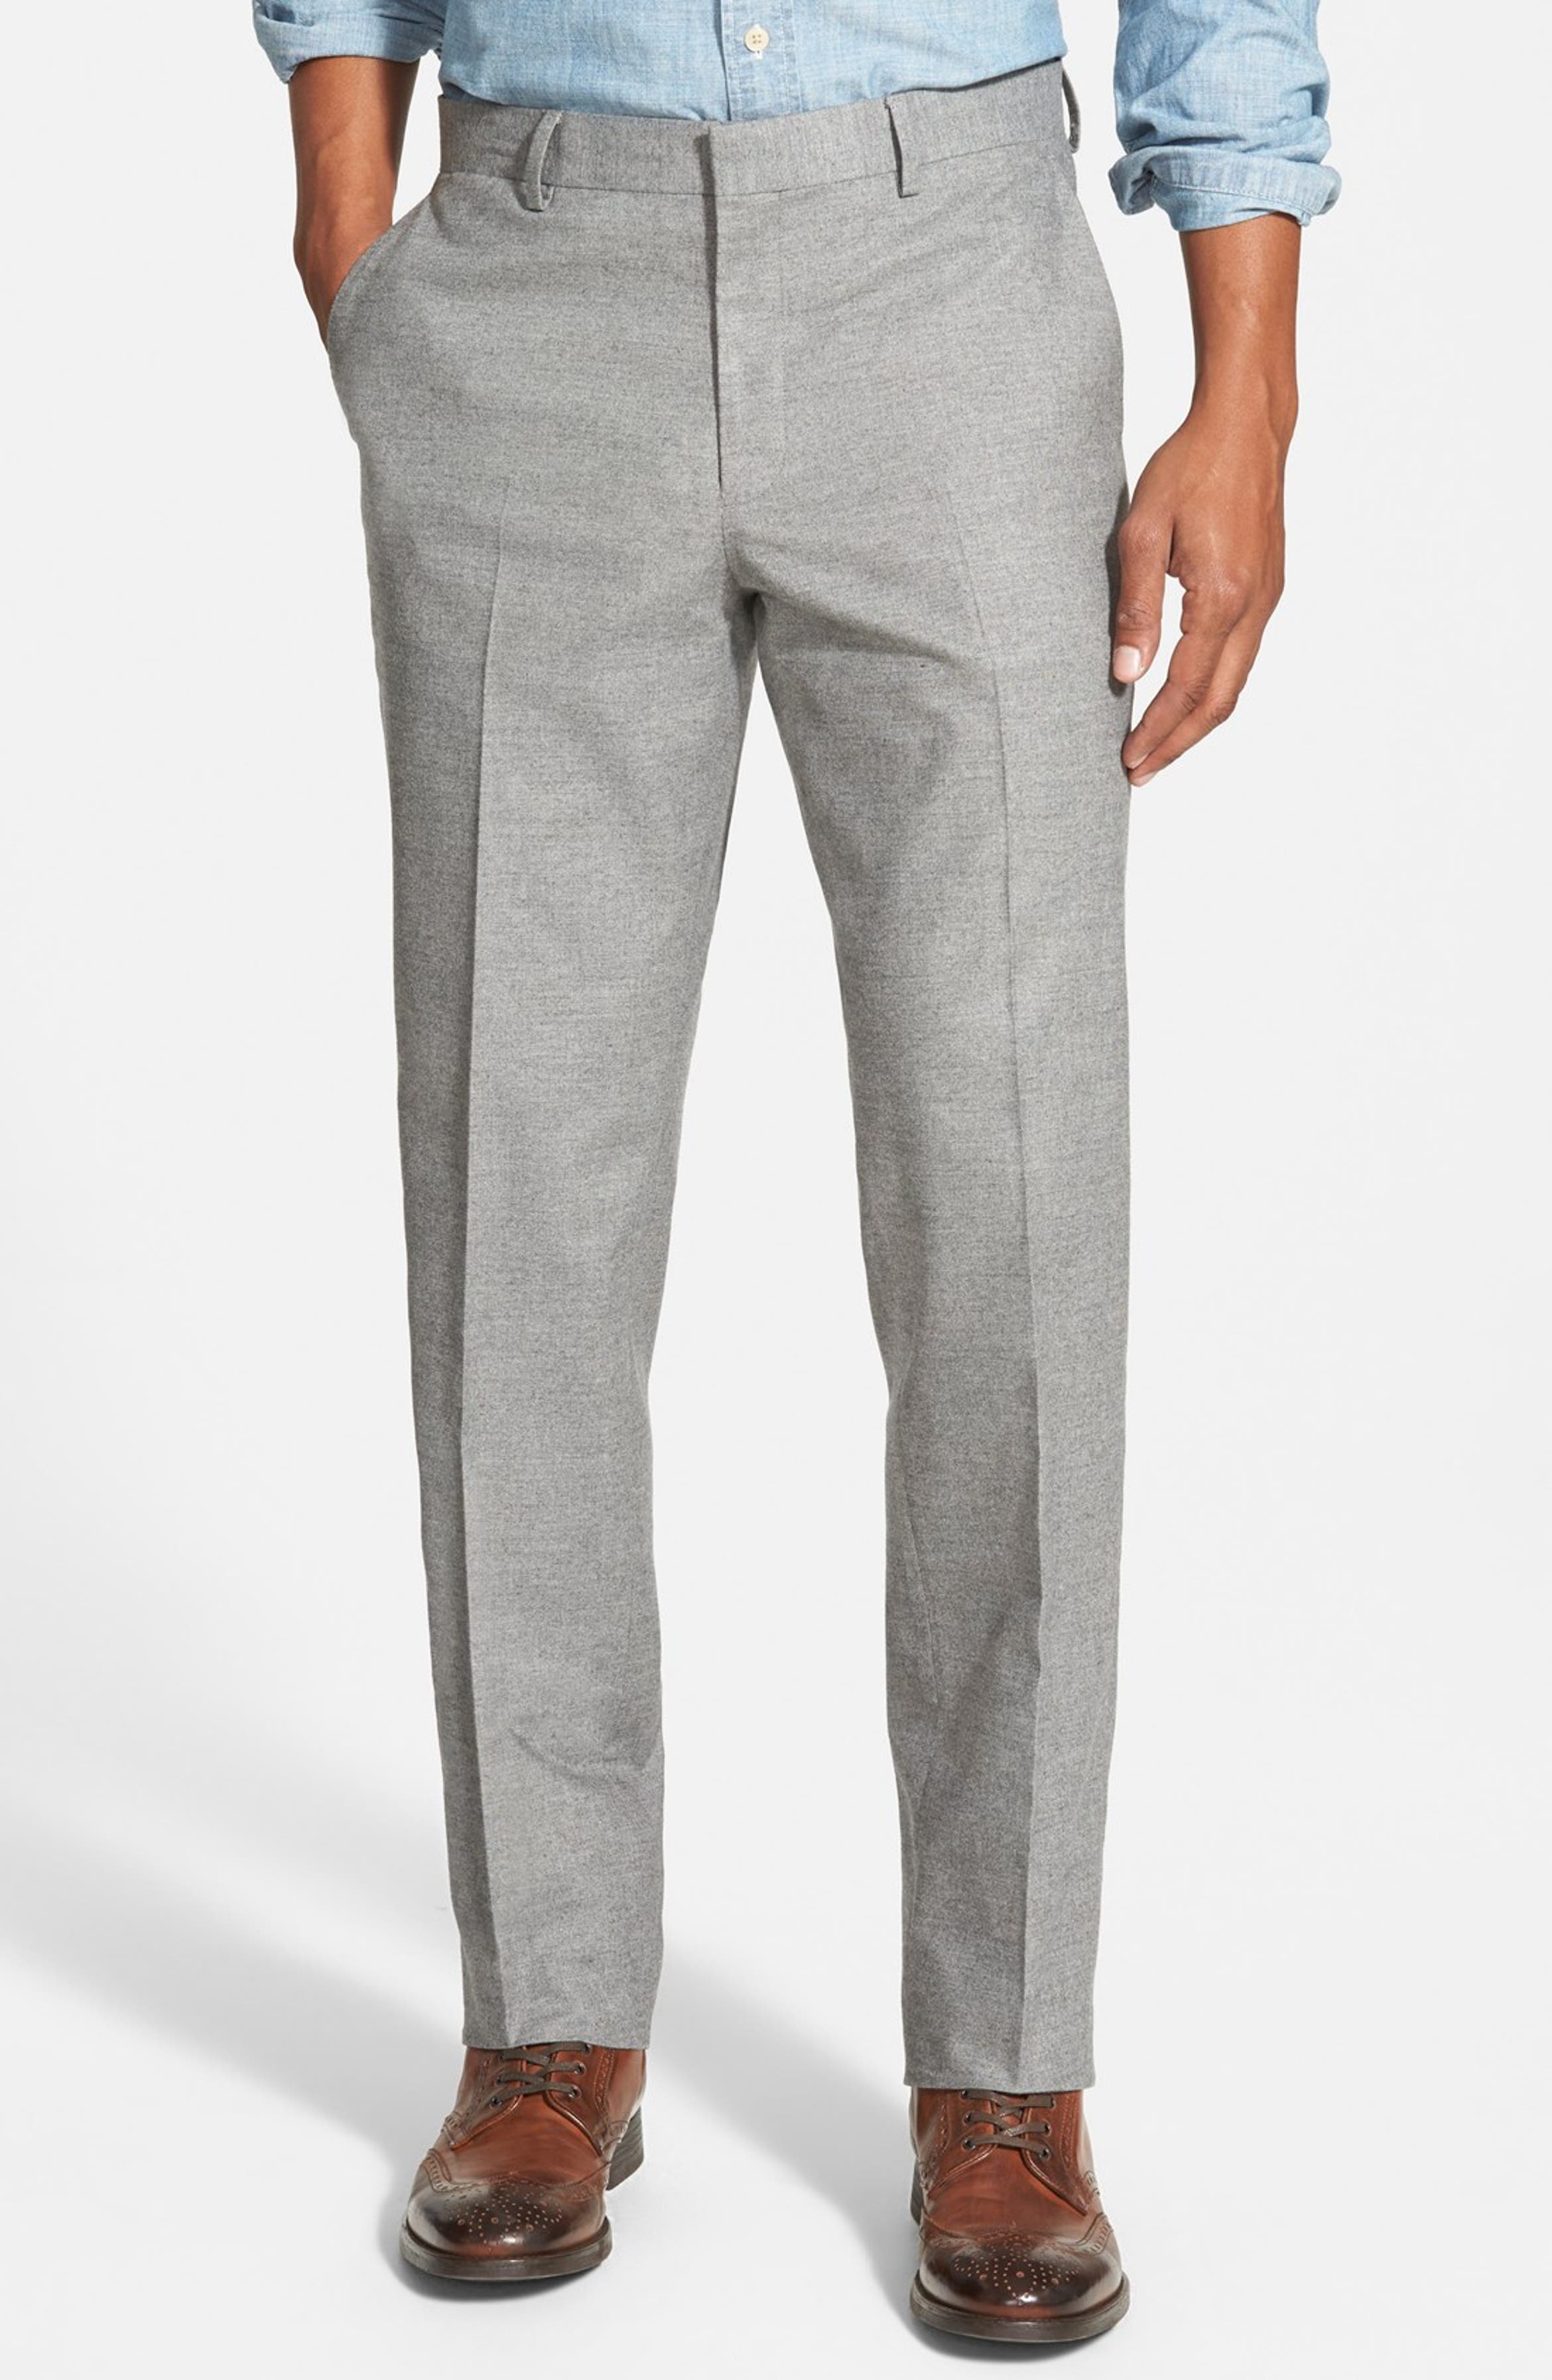 Wallin & Bros. Flat Front Solid Cotton Blend Trousers | Nordstrom